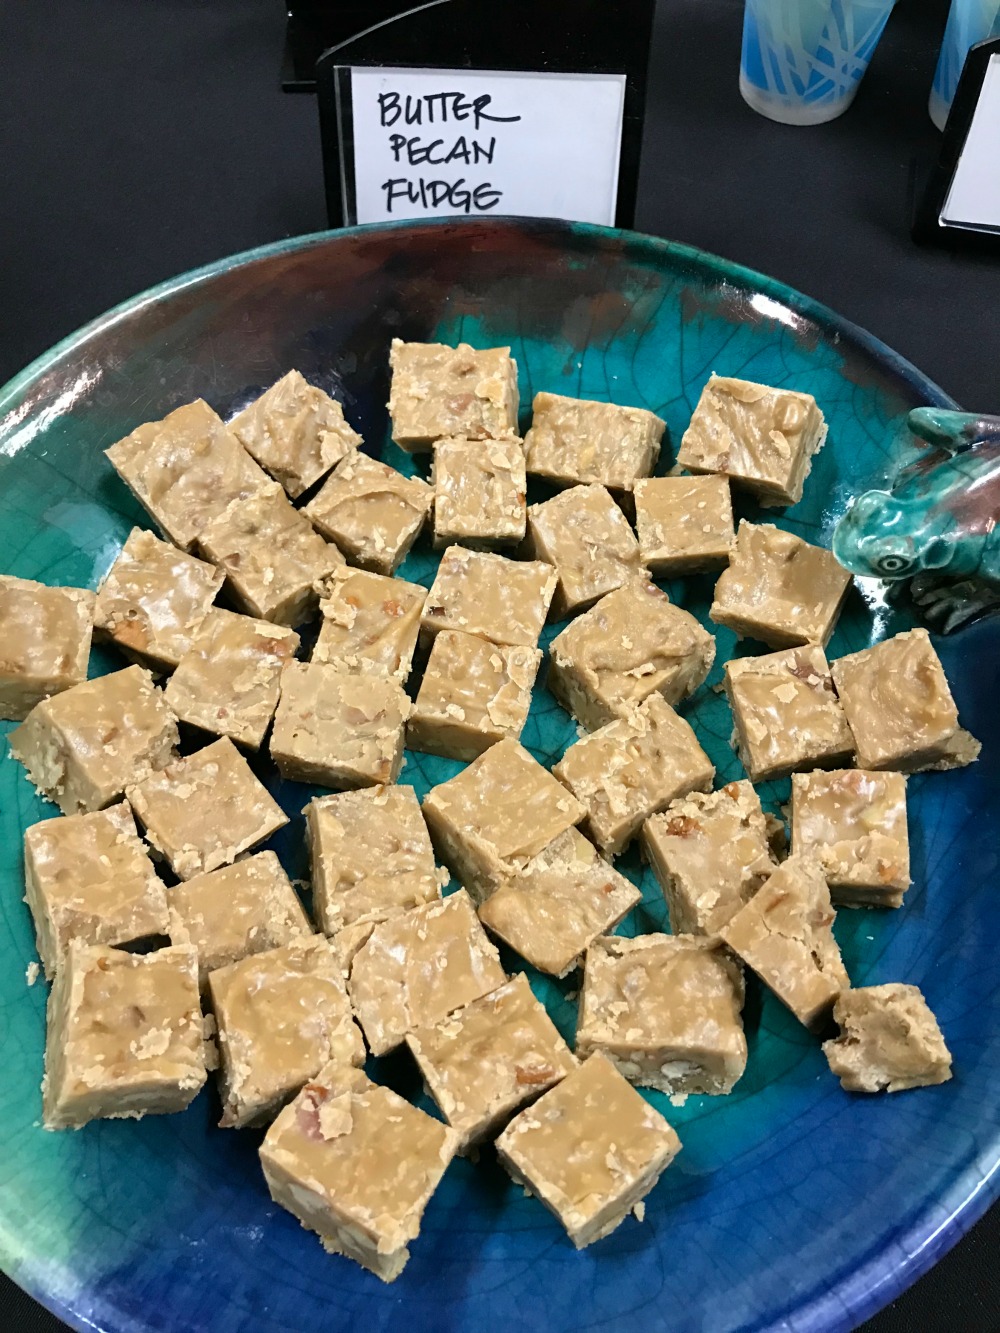 Dorothy Reinhold's Butter Pecan Fudge won 2nd place